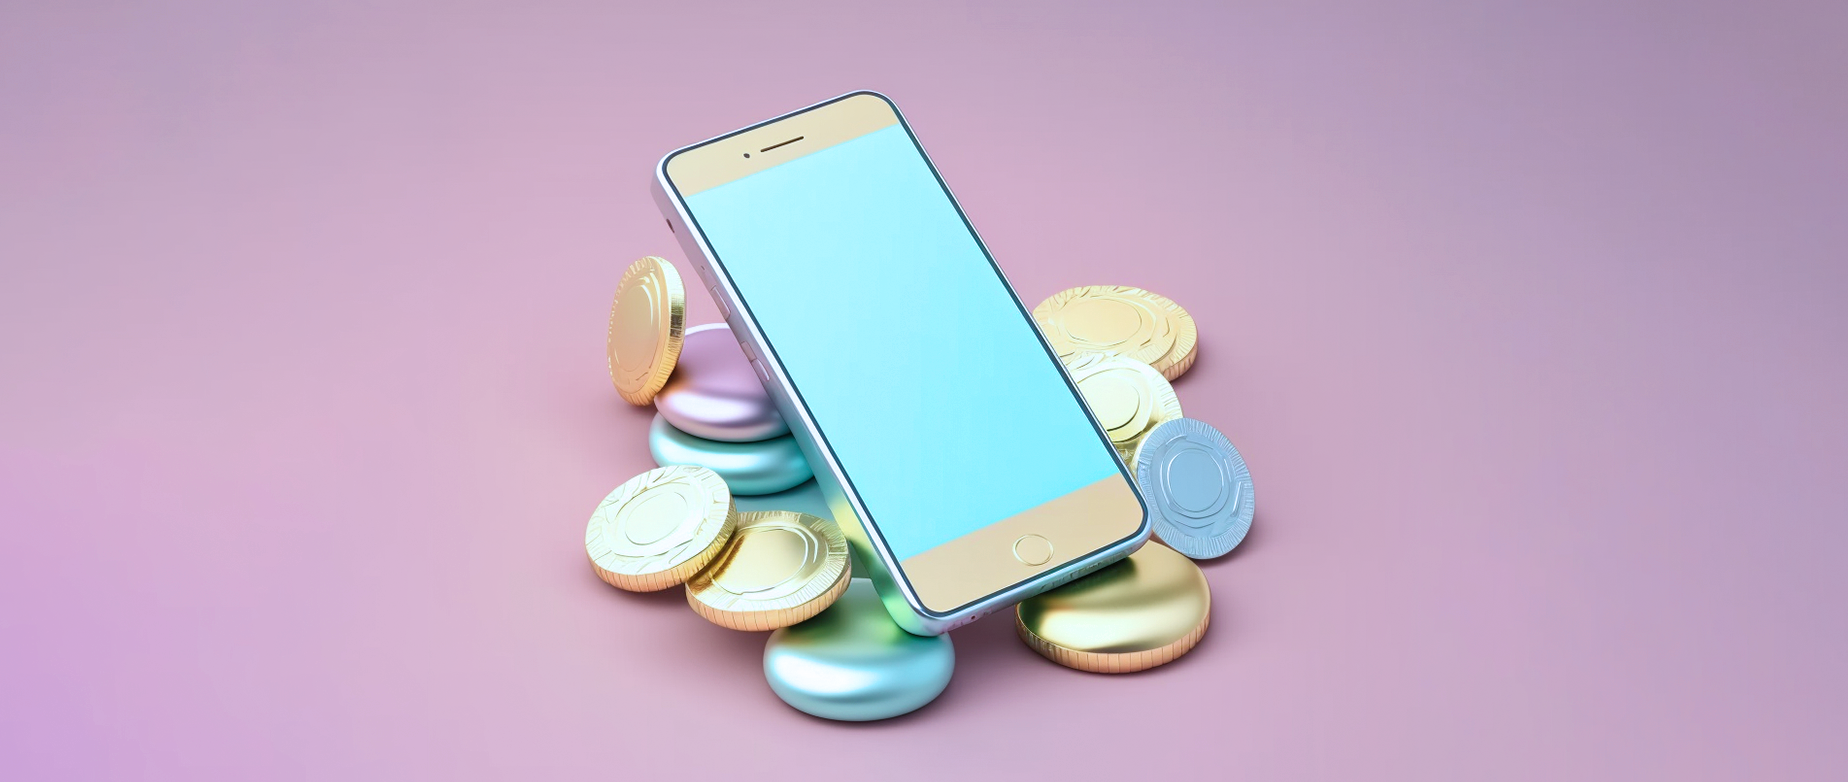 Illustration of a mobile phone laying on top of money and coins